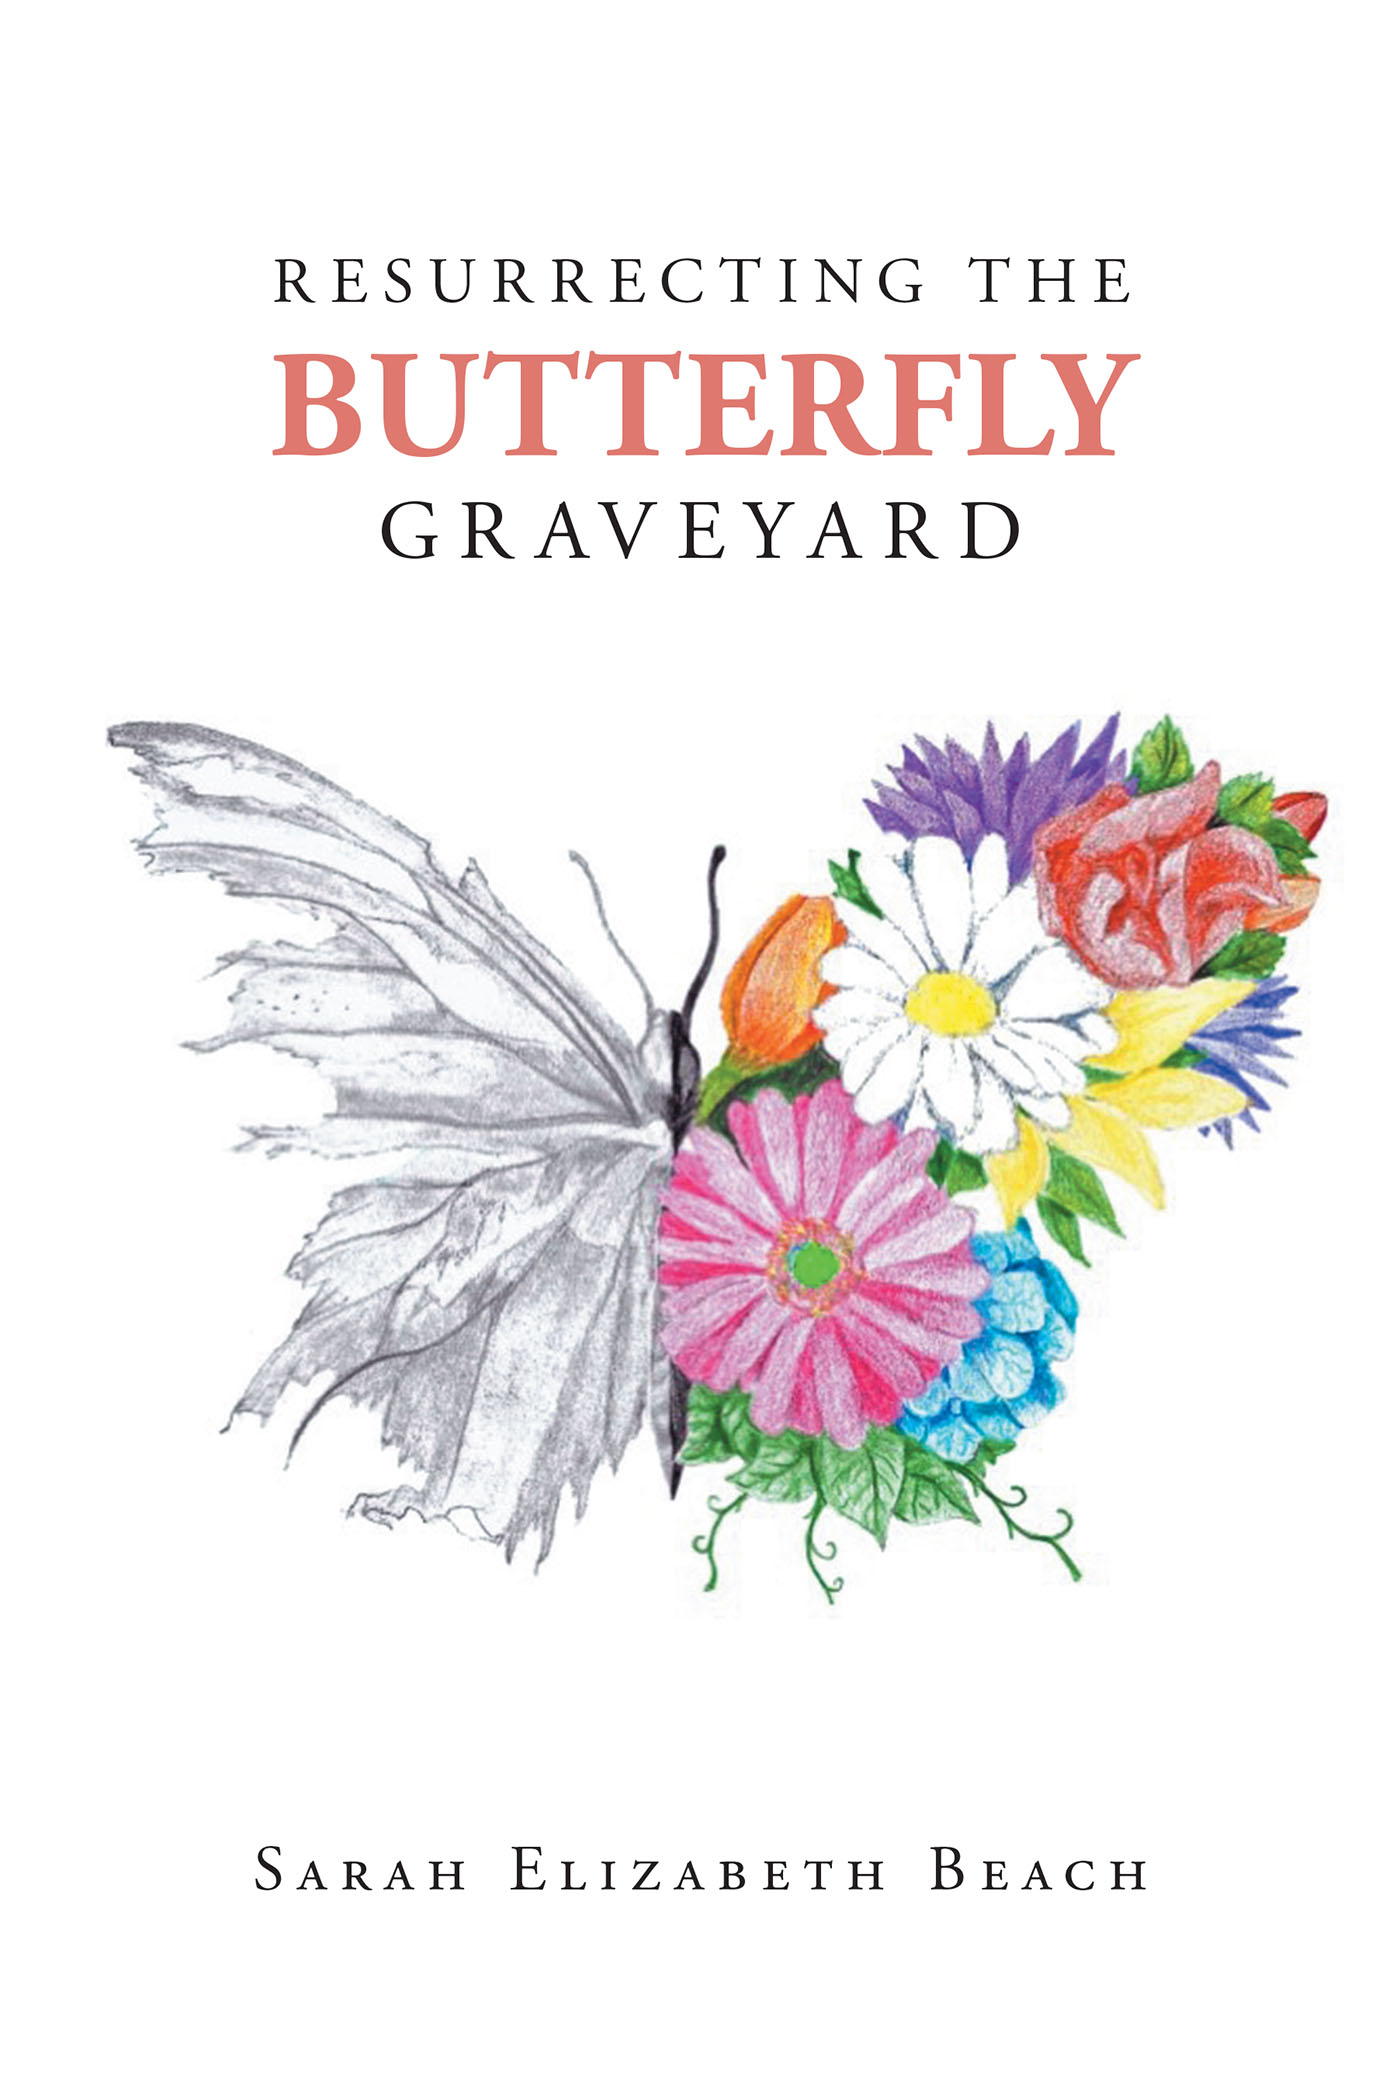 Sarah Elizabeth Beach’s Newly Released "Resurrecting the Butterfly Graveyard" is an Emotionally Charged Collection of Spiritual Poetry